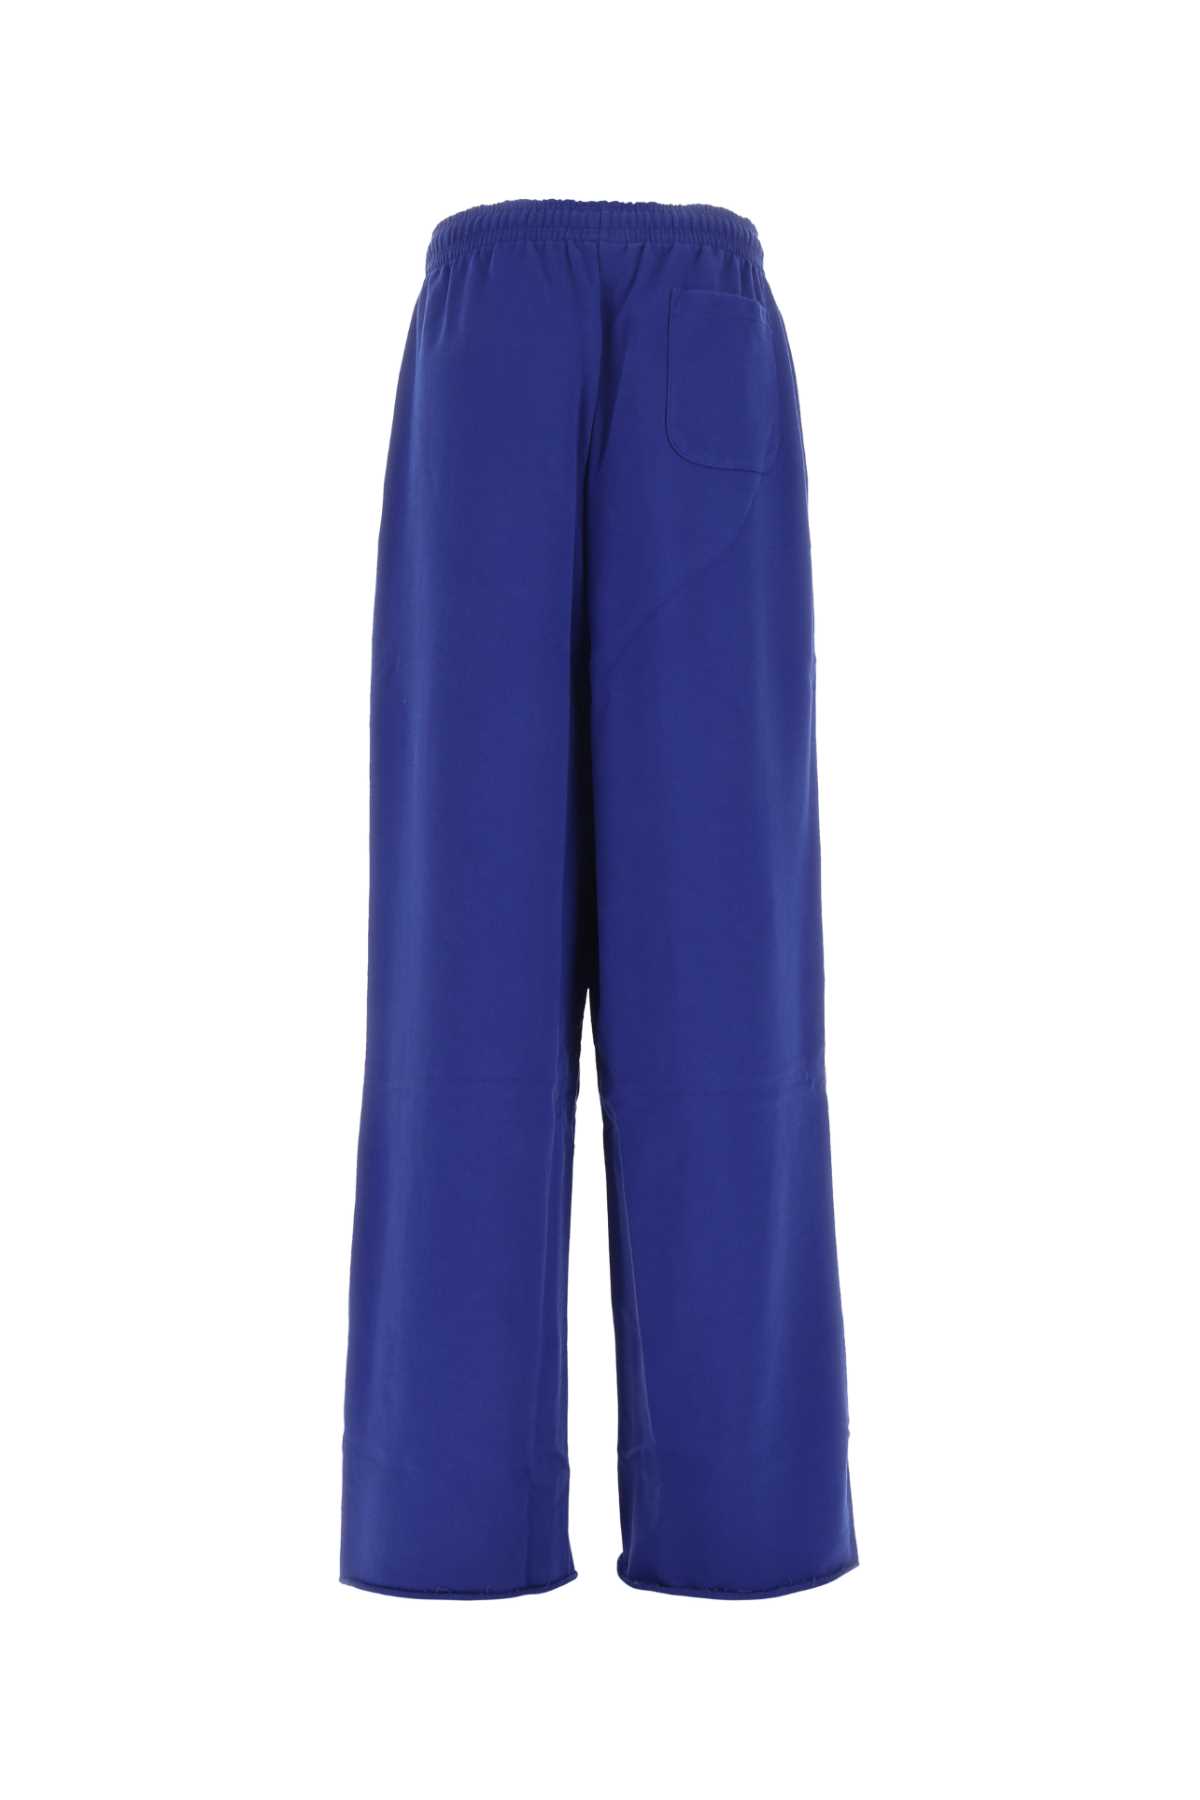 Vetements Blue Stretch Cotton Joggers In Royalblue